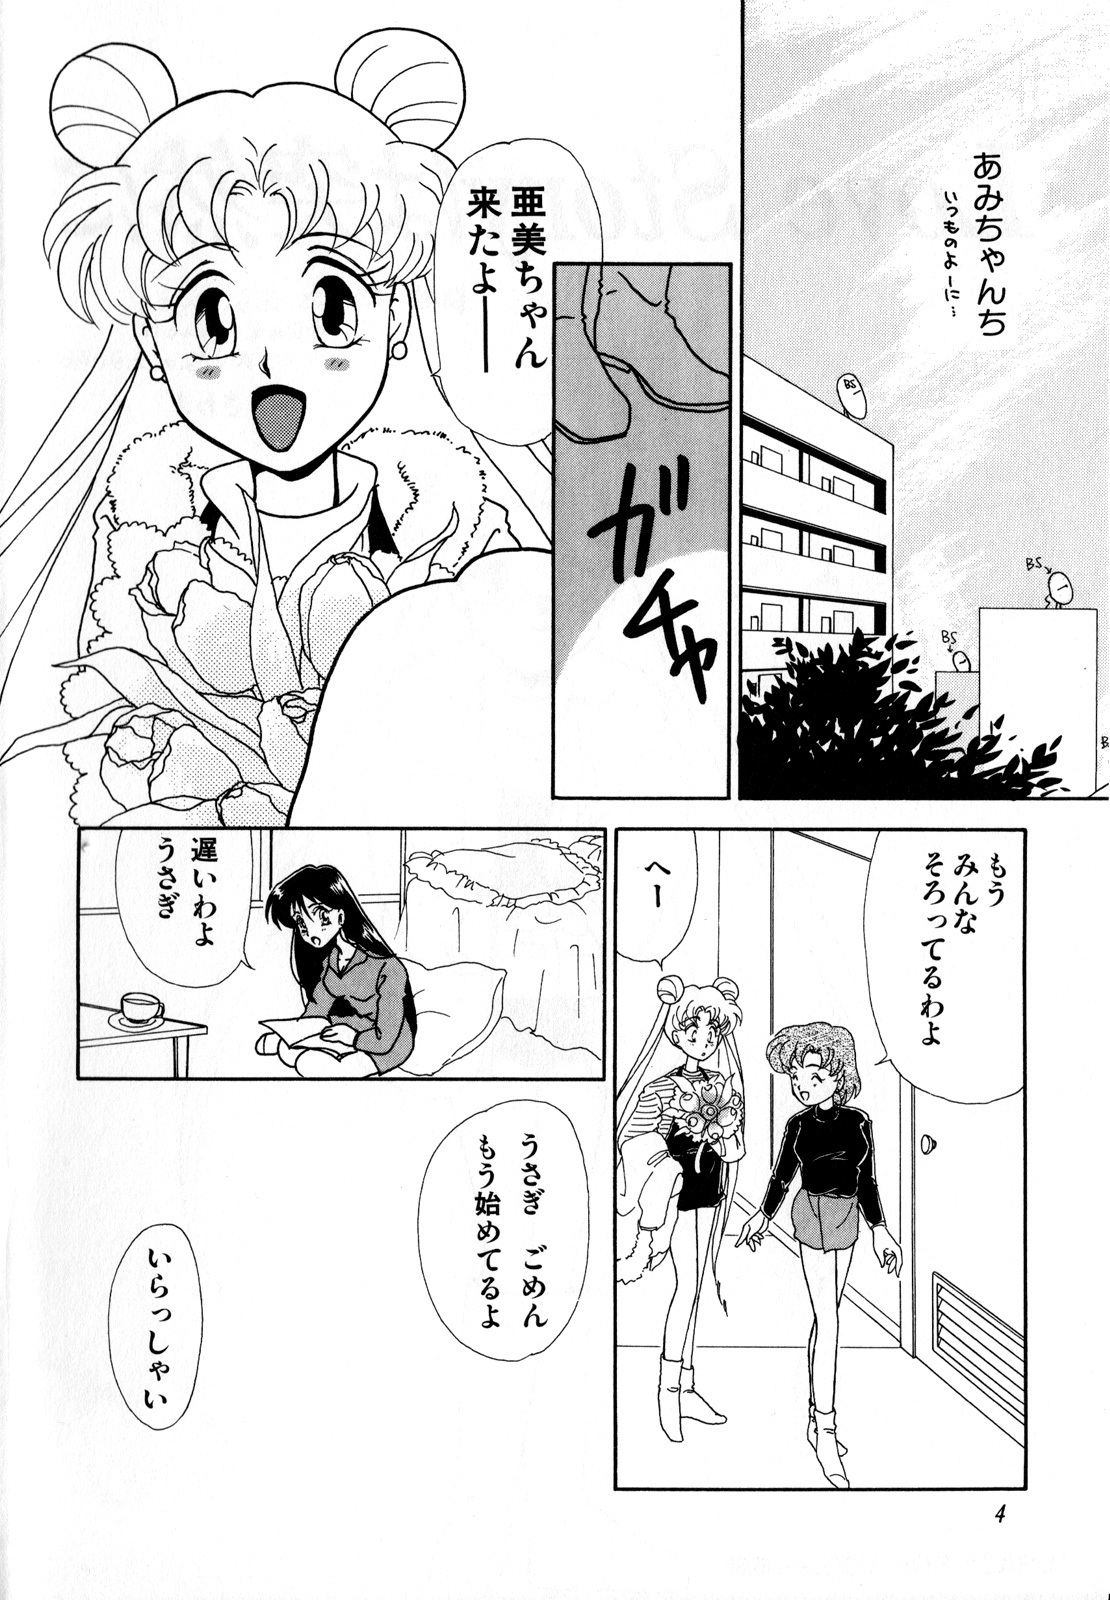 [Anthology] Lunatic Party 3 (Sailor Moon) page 5 full